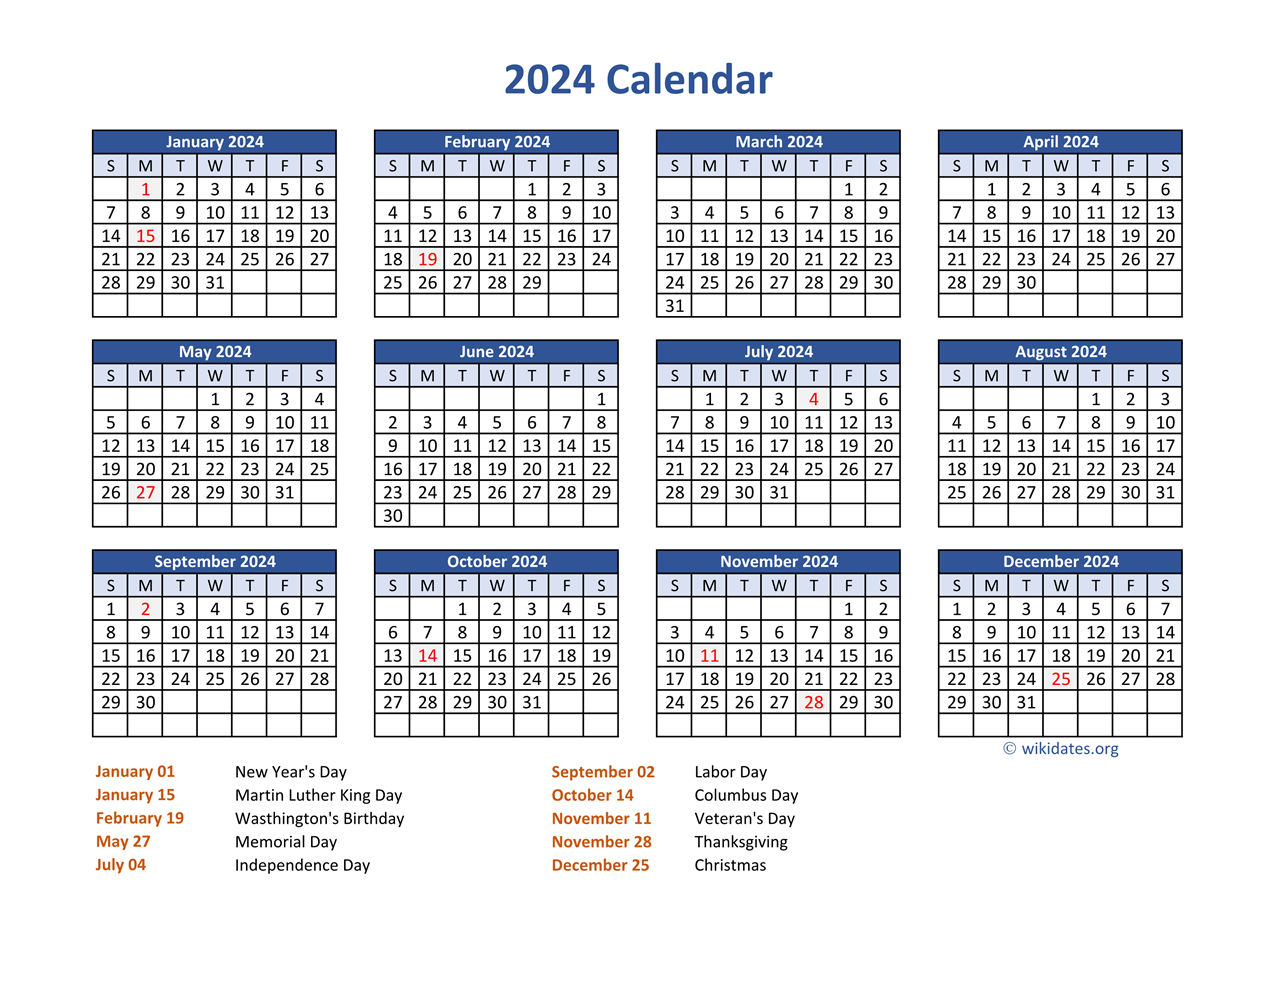 Pdf Calendar 2024 With Federal Holidays | Wikidates for 2024 Free Printable Calendar With Holidays